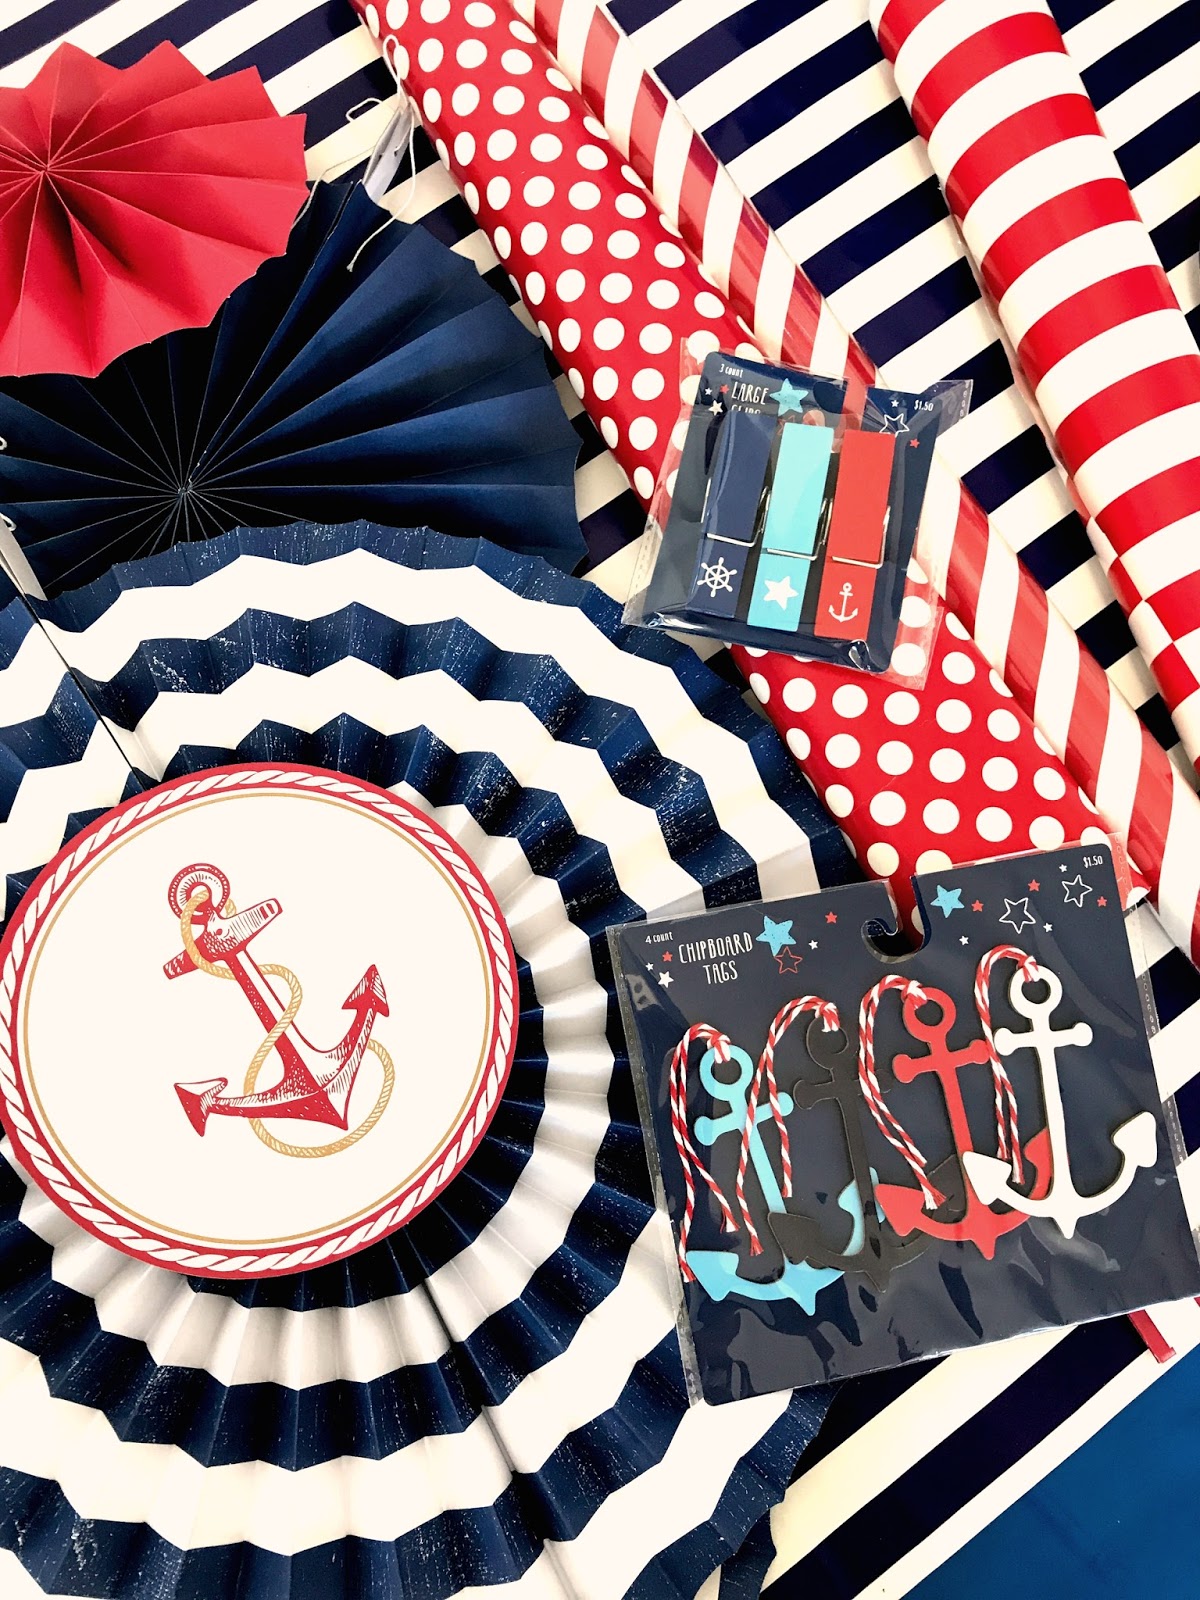 michelle paige blogs: Anchor Themed Birthday Party